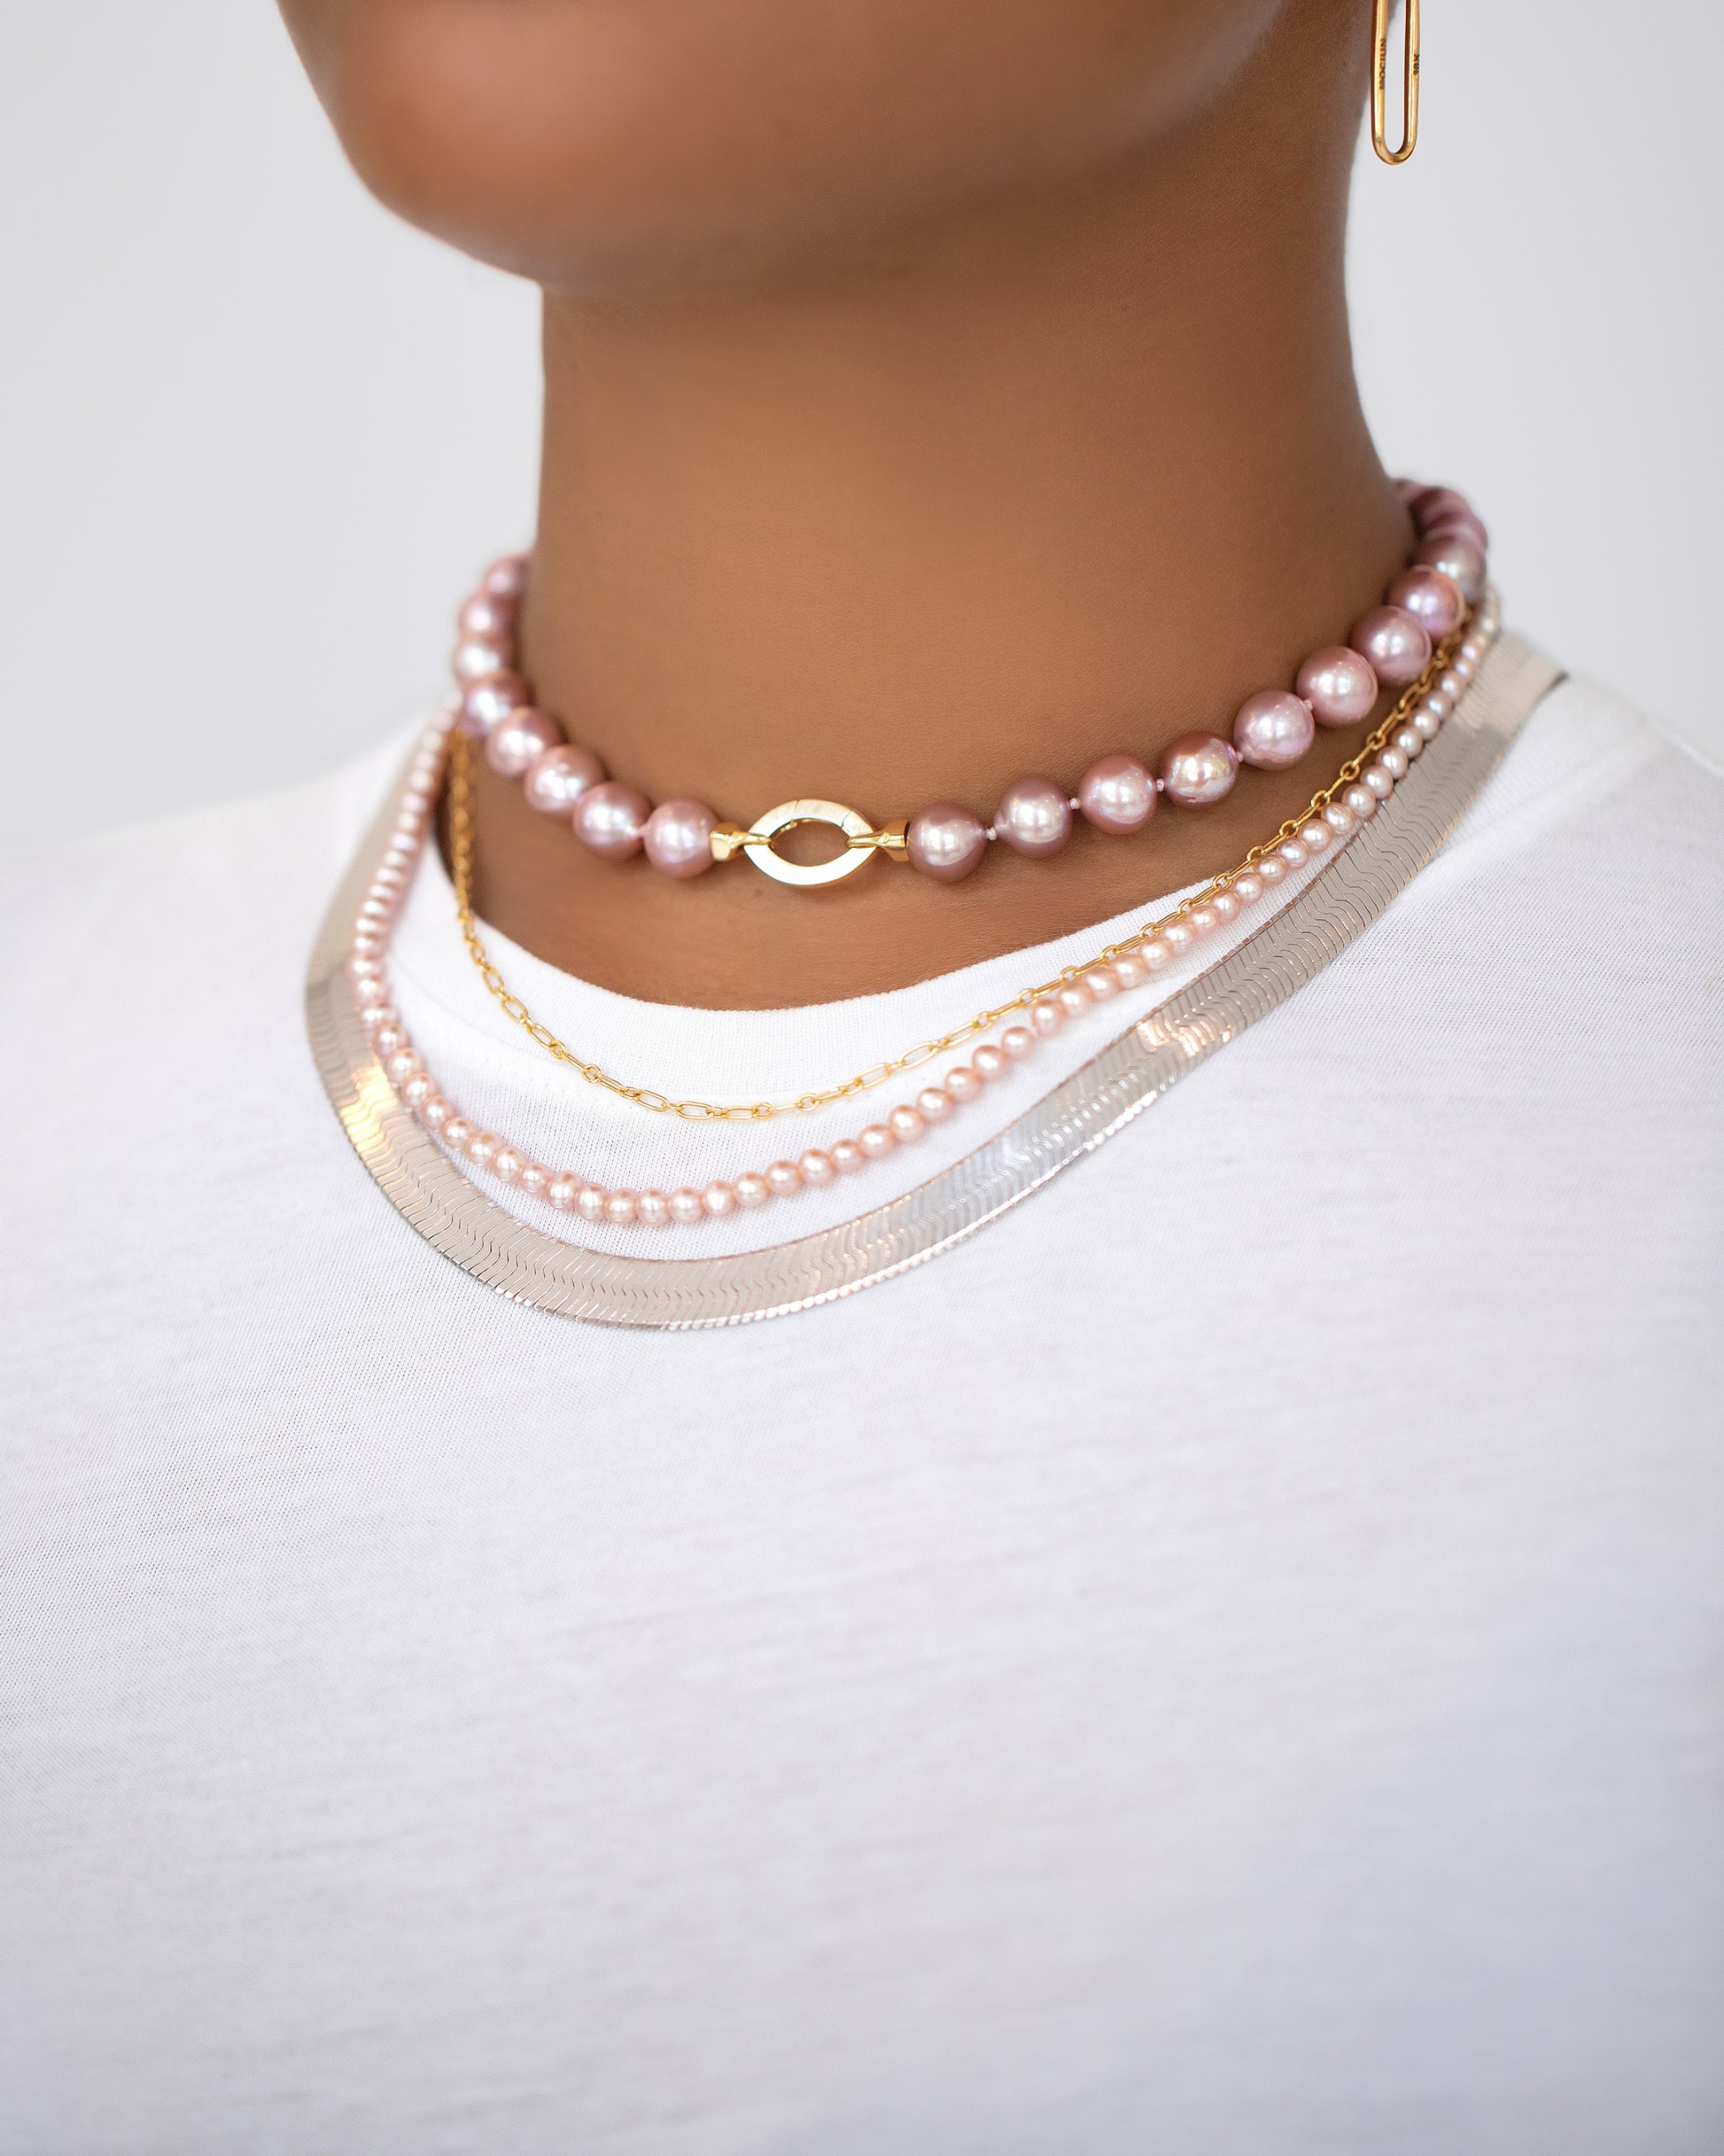 Cormorant Pearl Necklace, Hot Dog Chain Necklace, Seed Pearl Necklace and Silver Herringbone Chain on model.